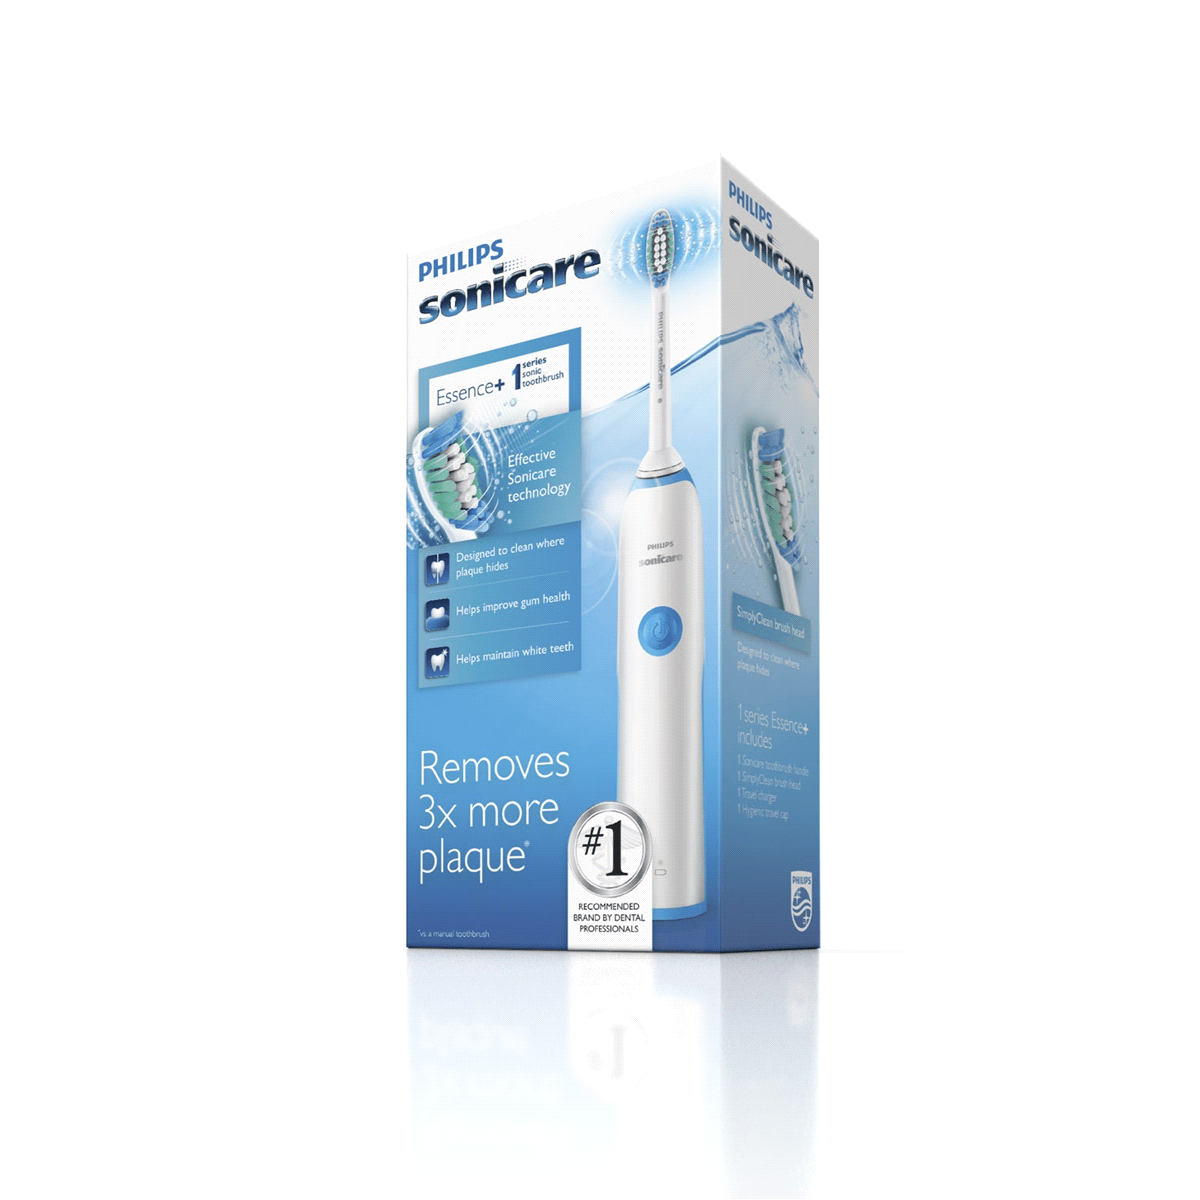 Sonicare Logo - Philips Sonicare Essence+ Rechargeable Electric Toothbrush